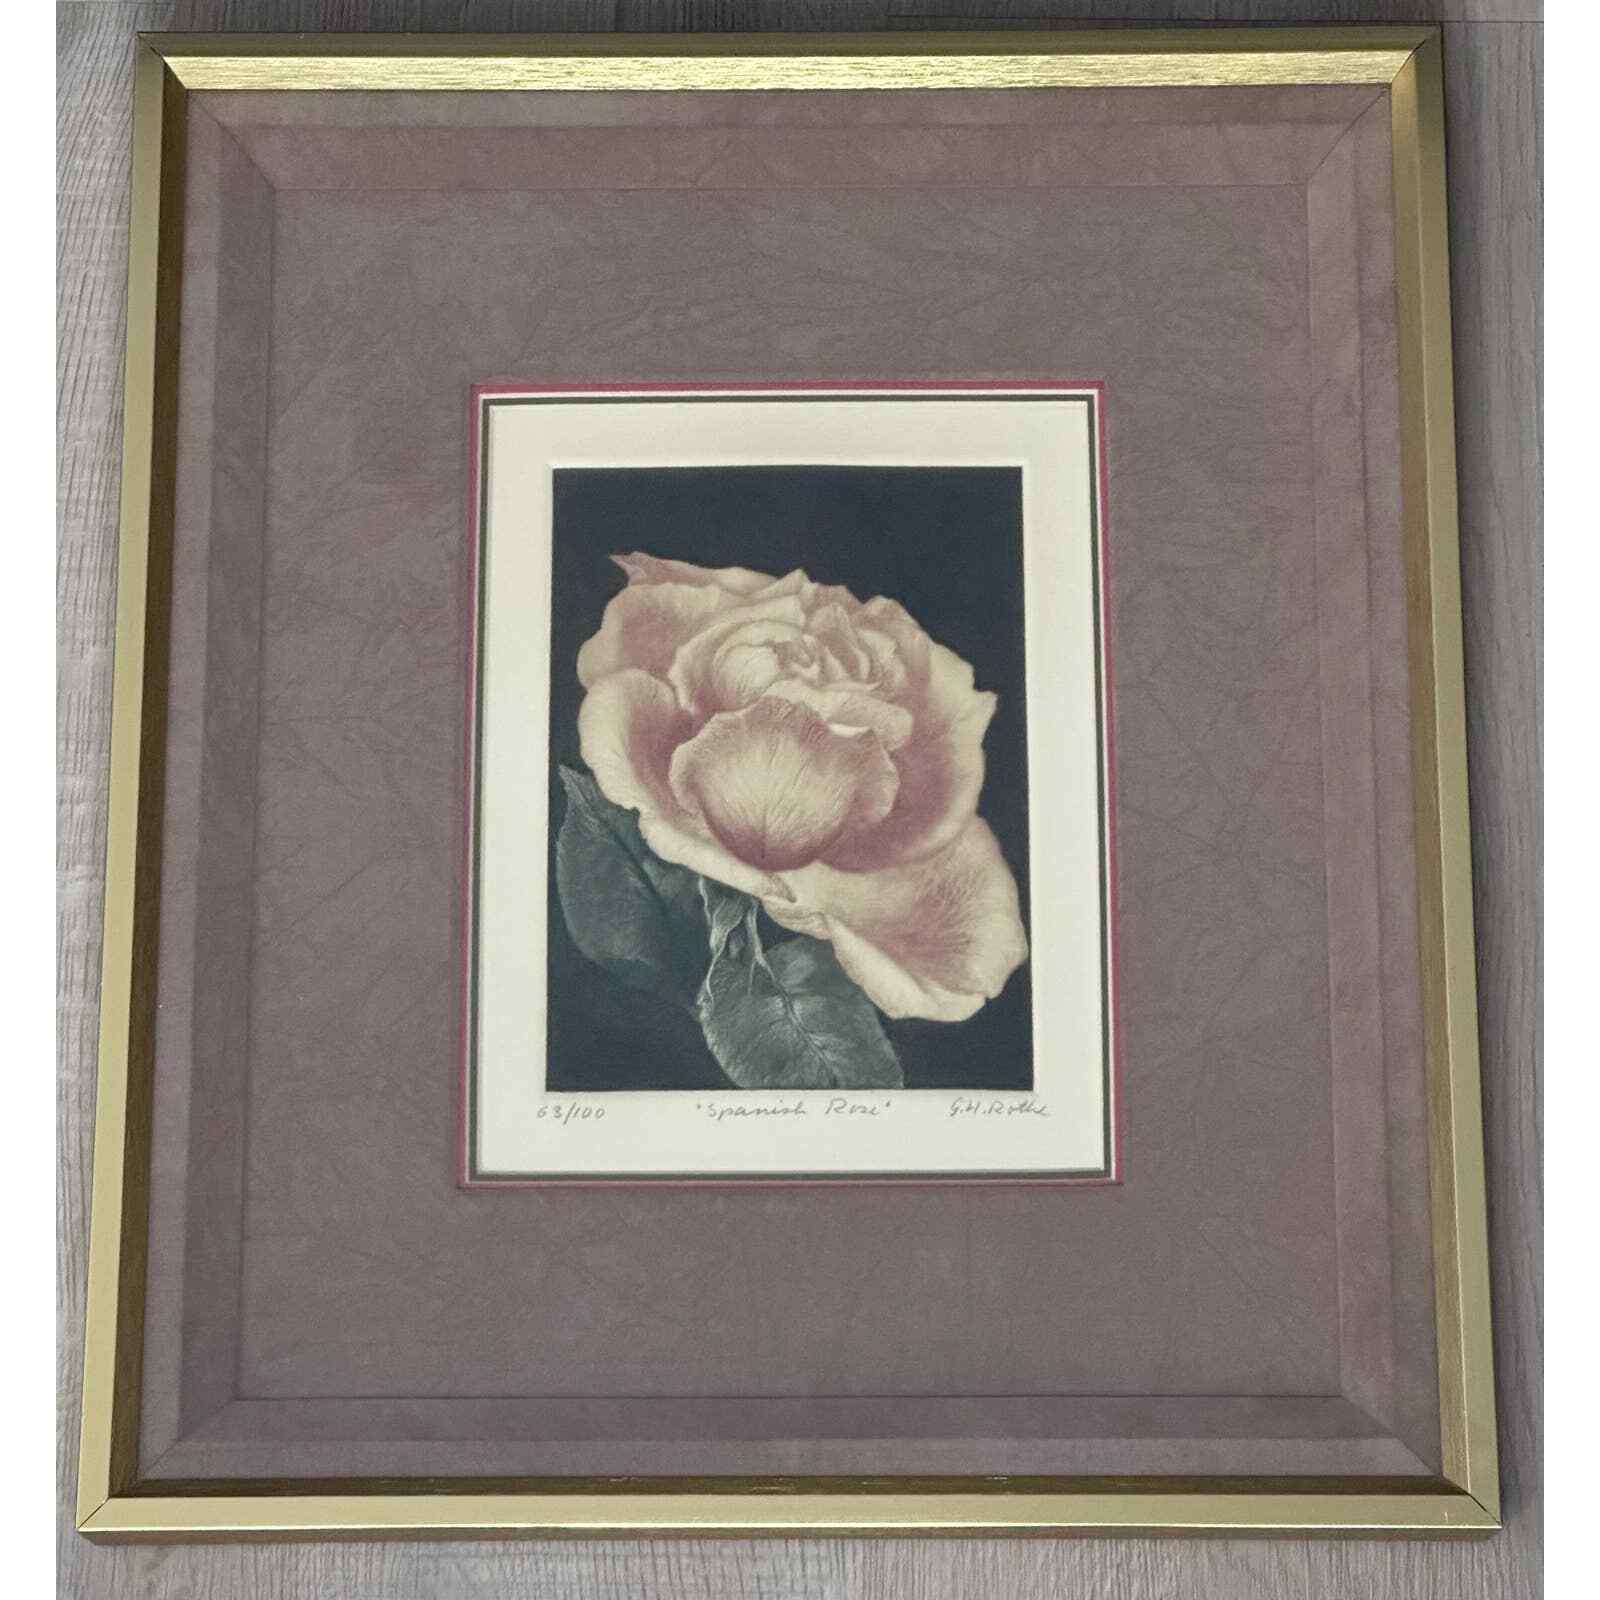 Rare Mezzotint limited edition “Spanish Rose” by G.H. Rothe